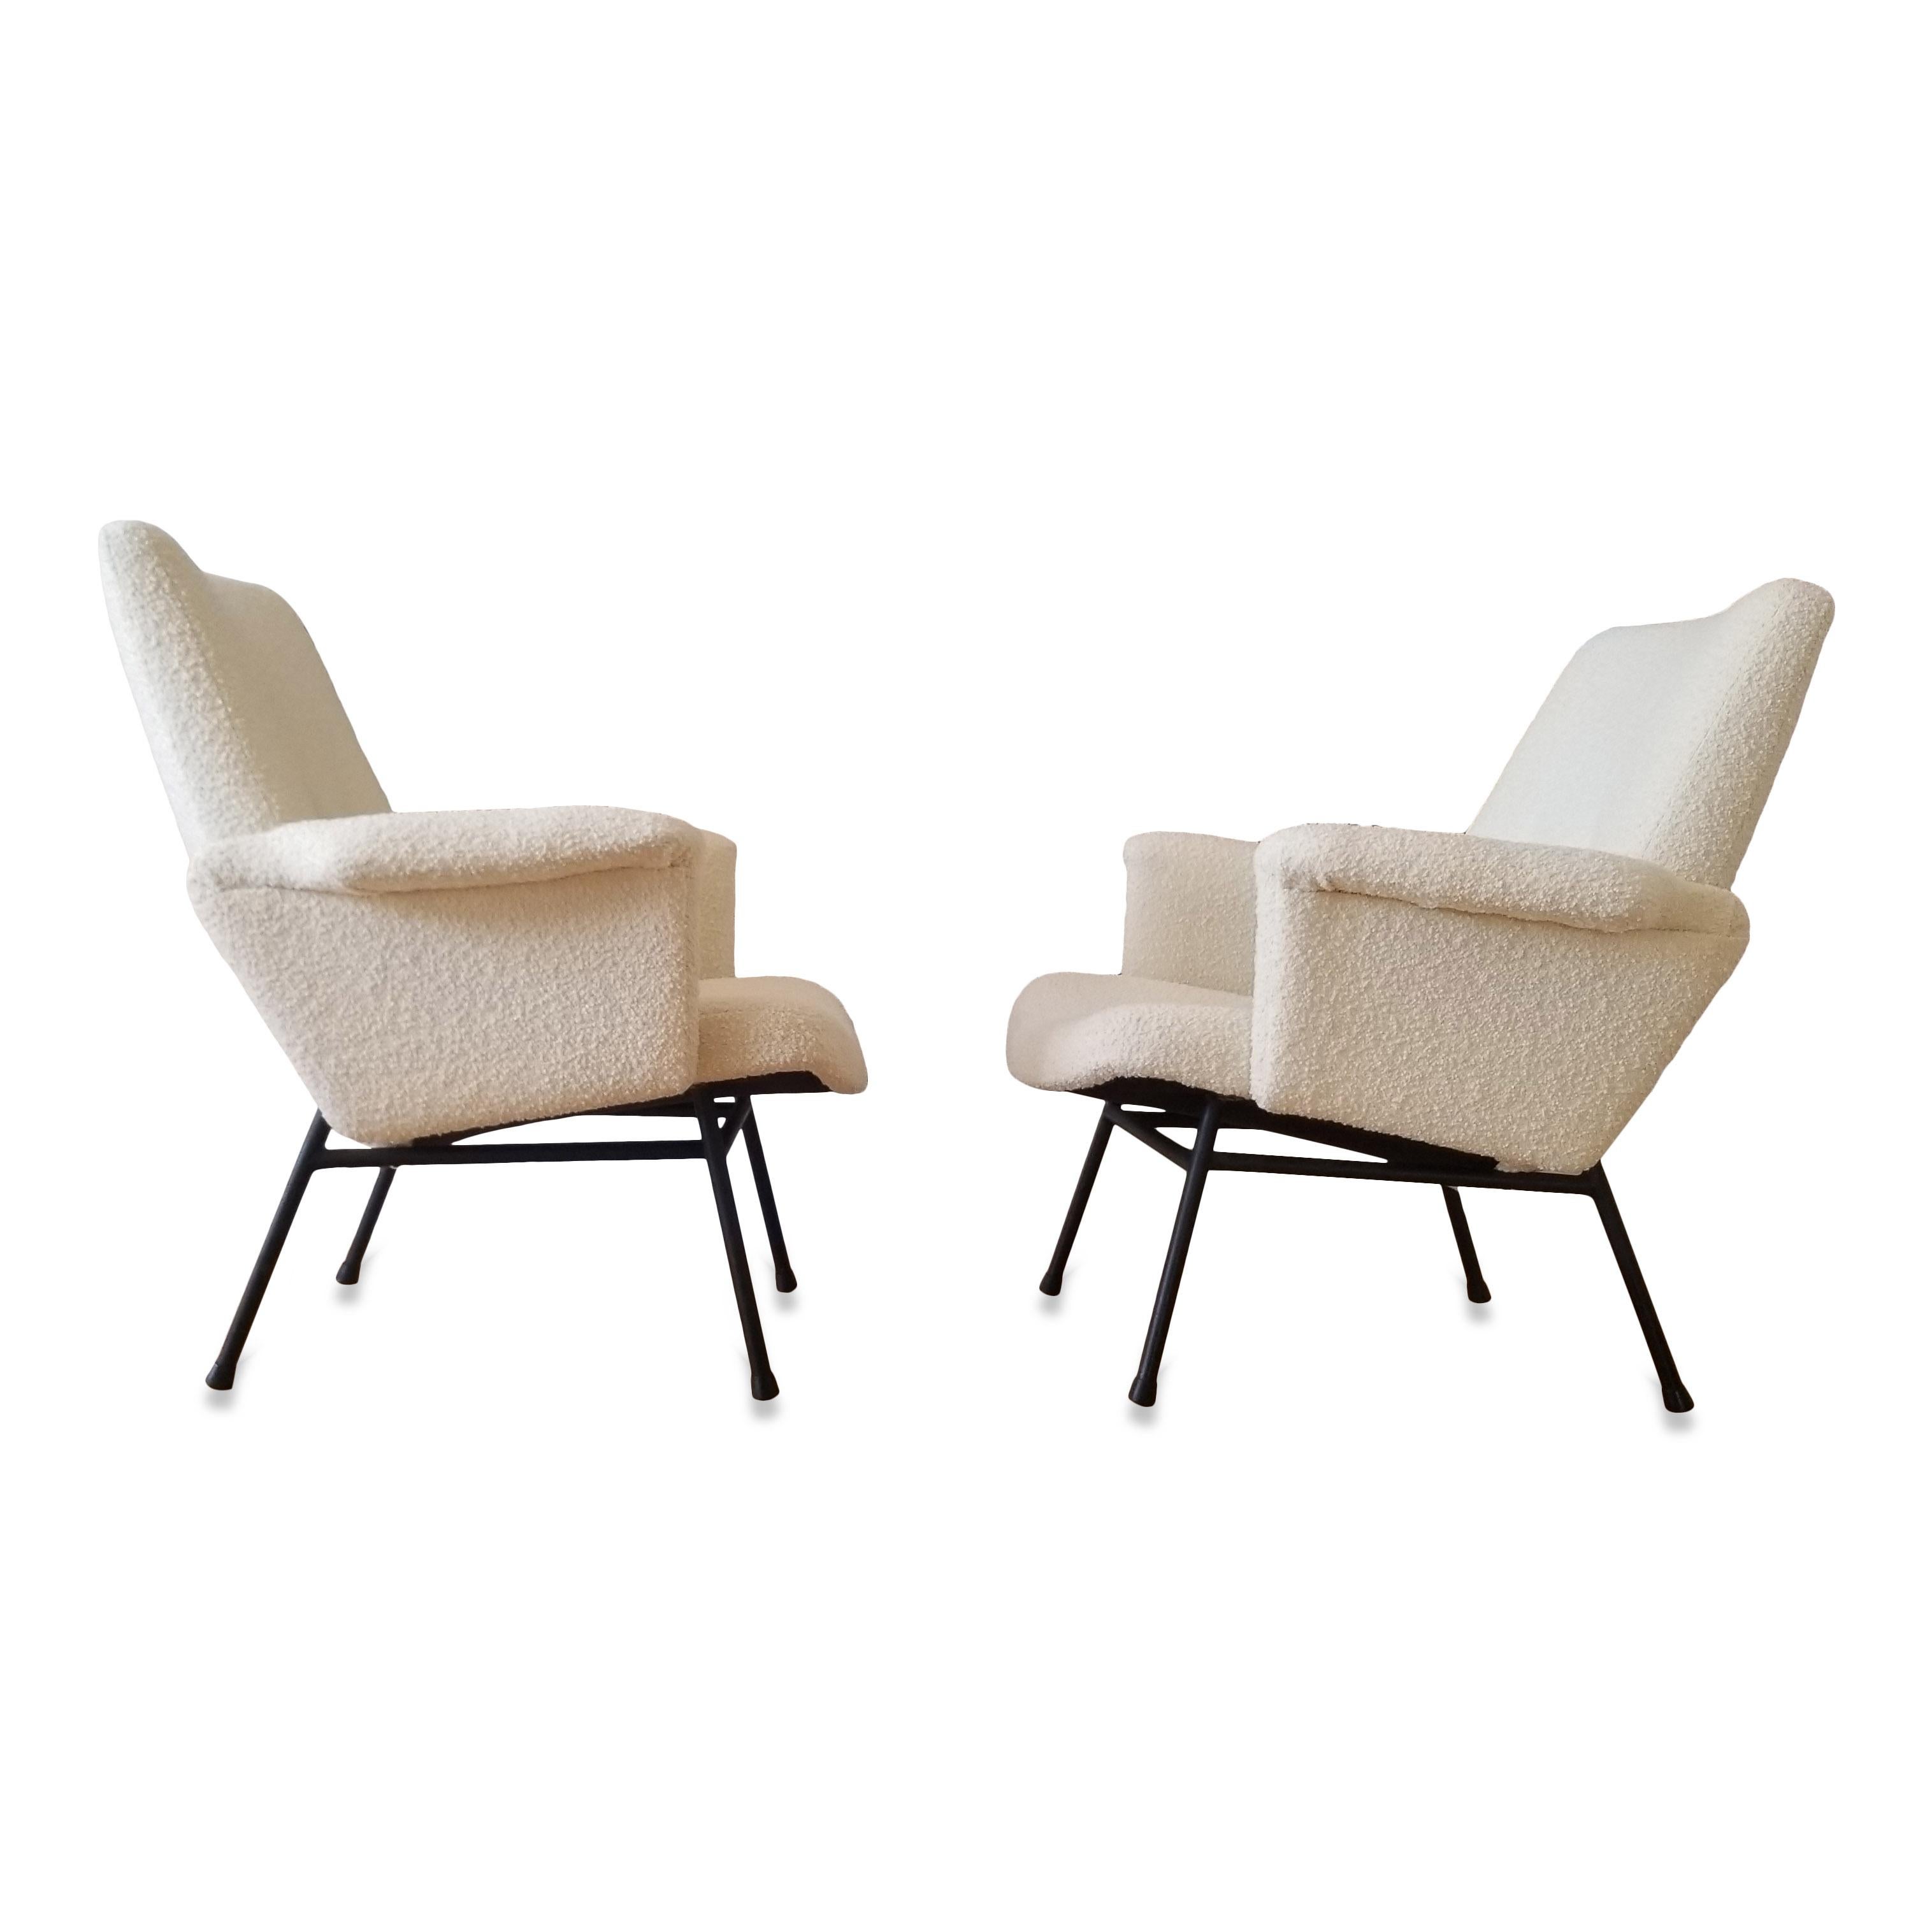 Upholstery Iconic Crème Bouclette SK660 Armchairs by Pierre Guariche, France, 1960s